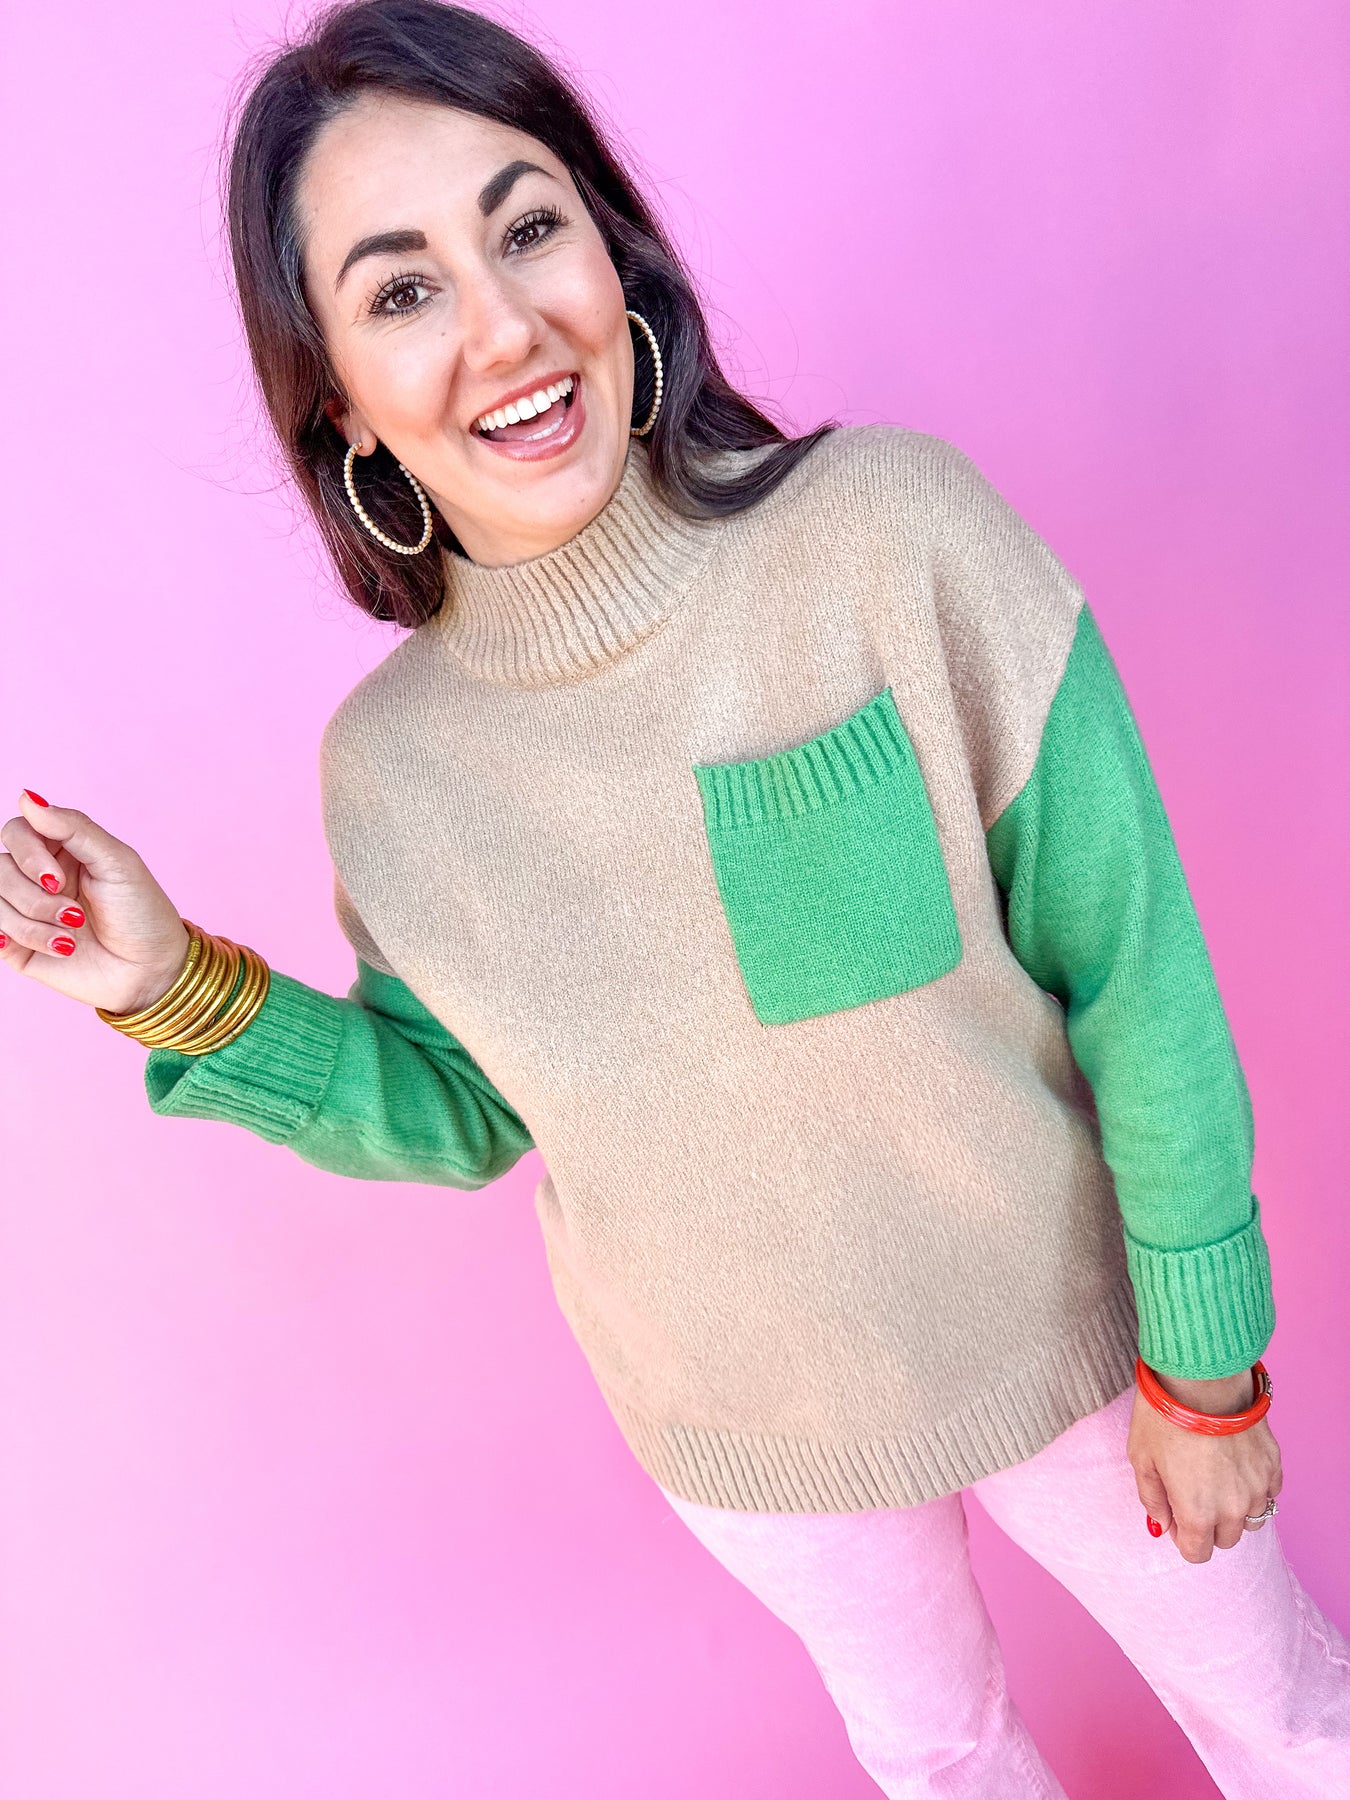 Pictured is a woman in a tan and green sweater.